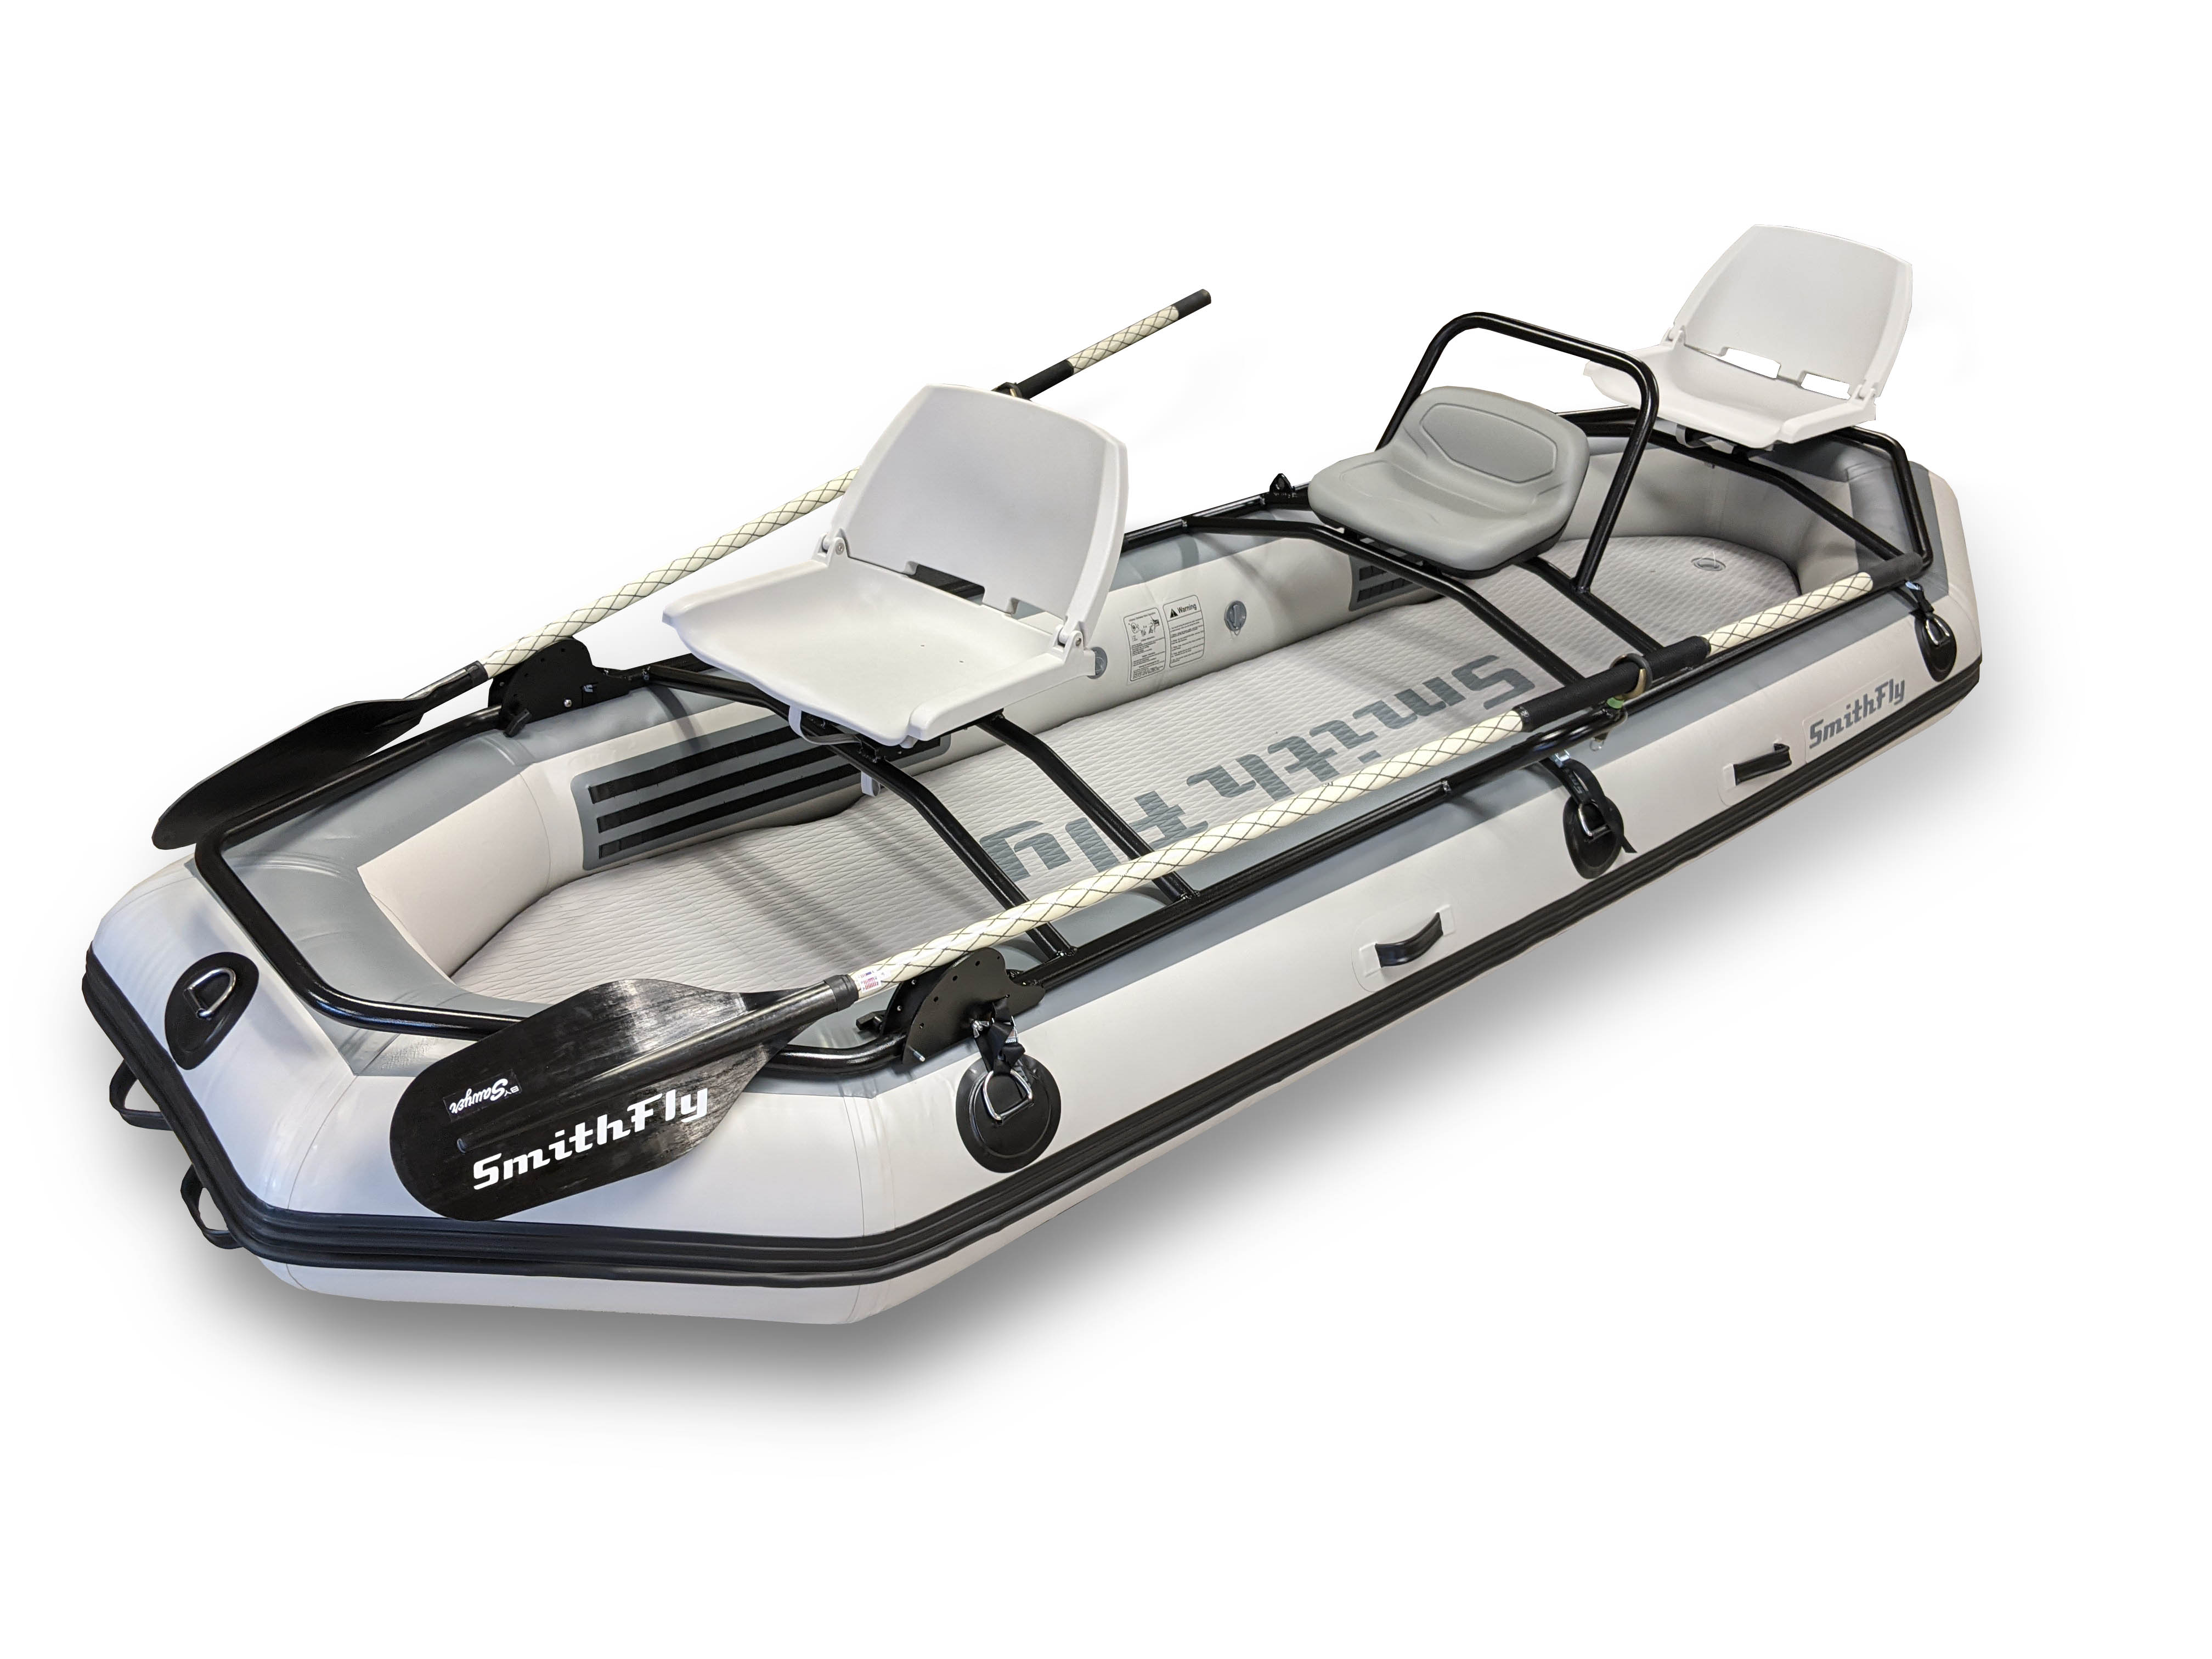 A Look at the Ultimate Drift Boat